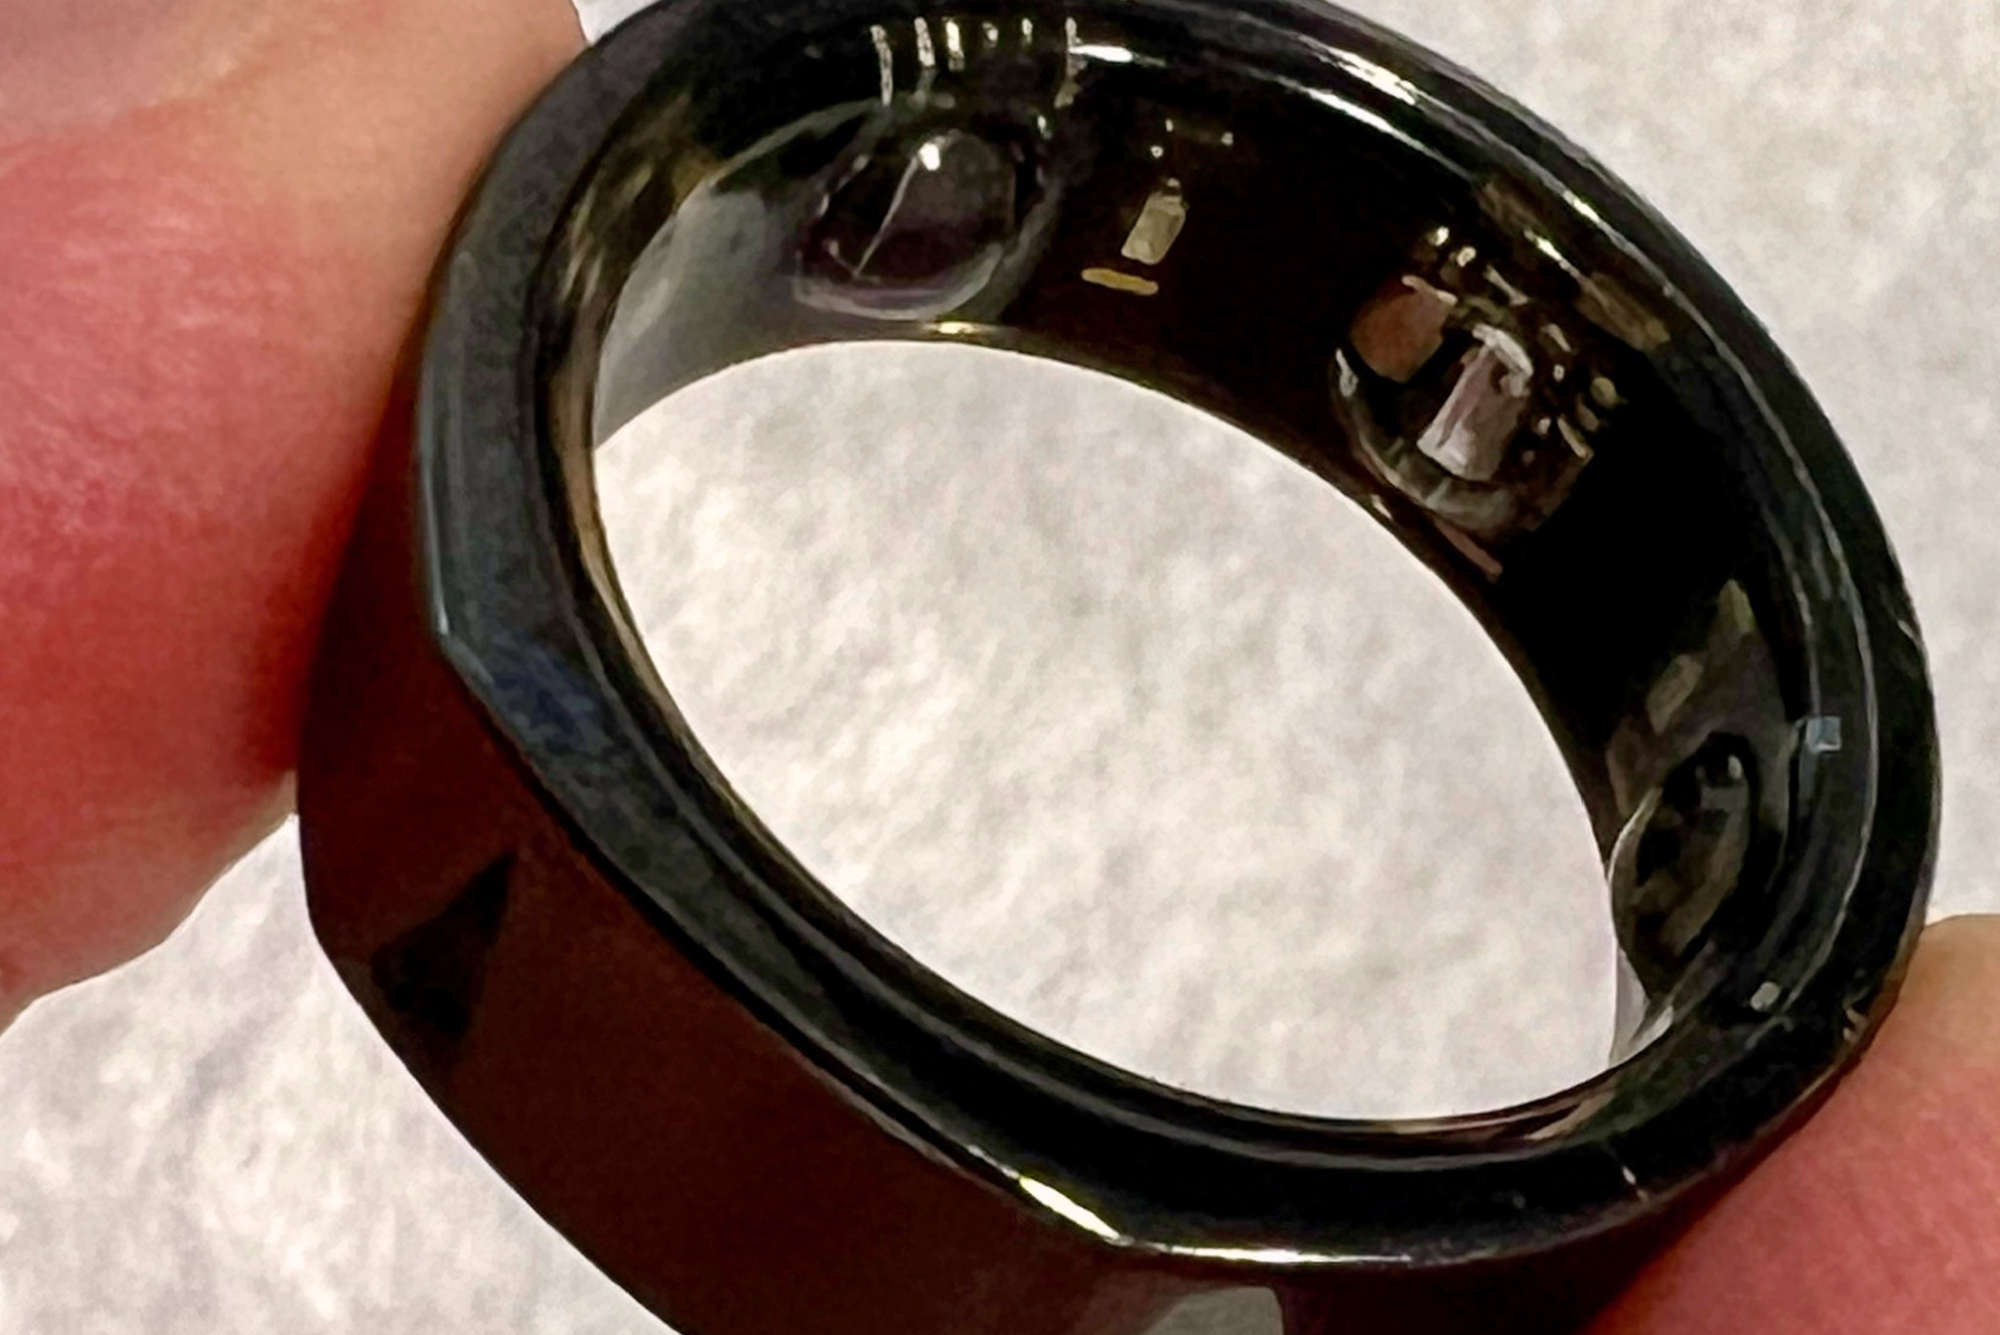 A close-up shot of a black Oura Ring.